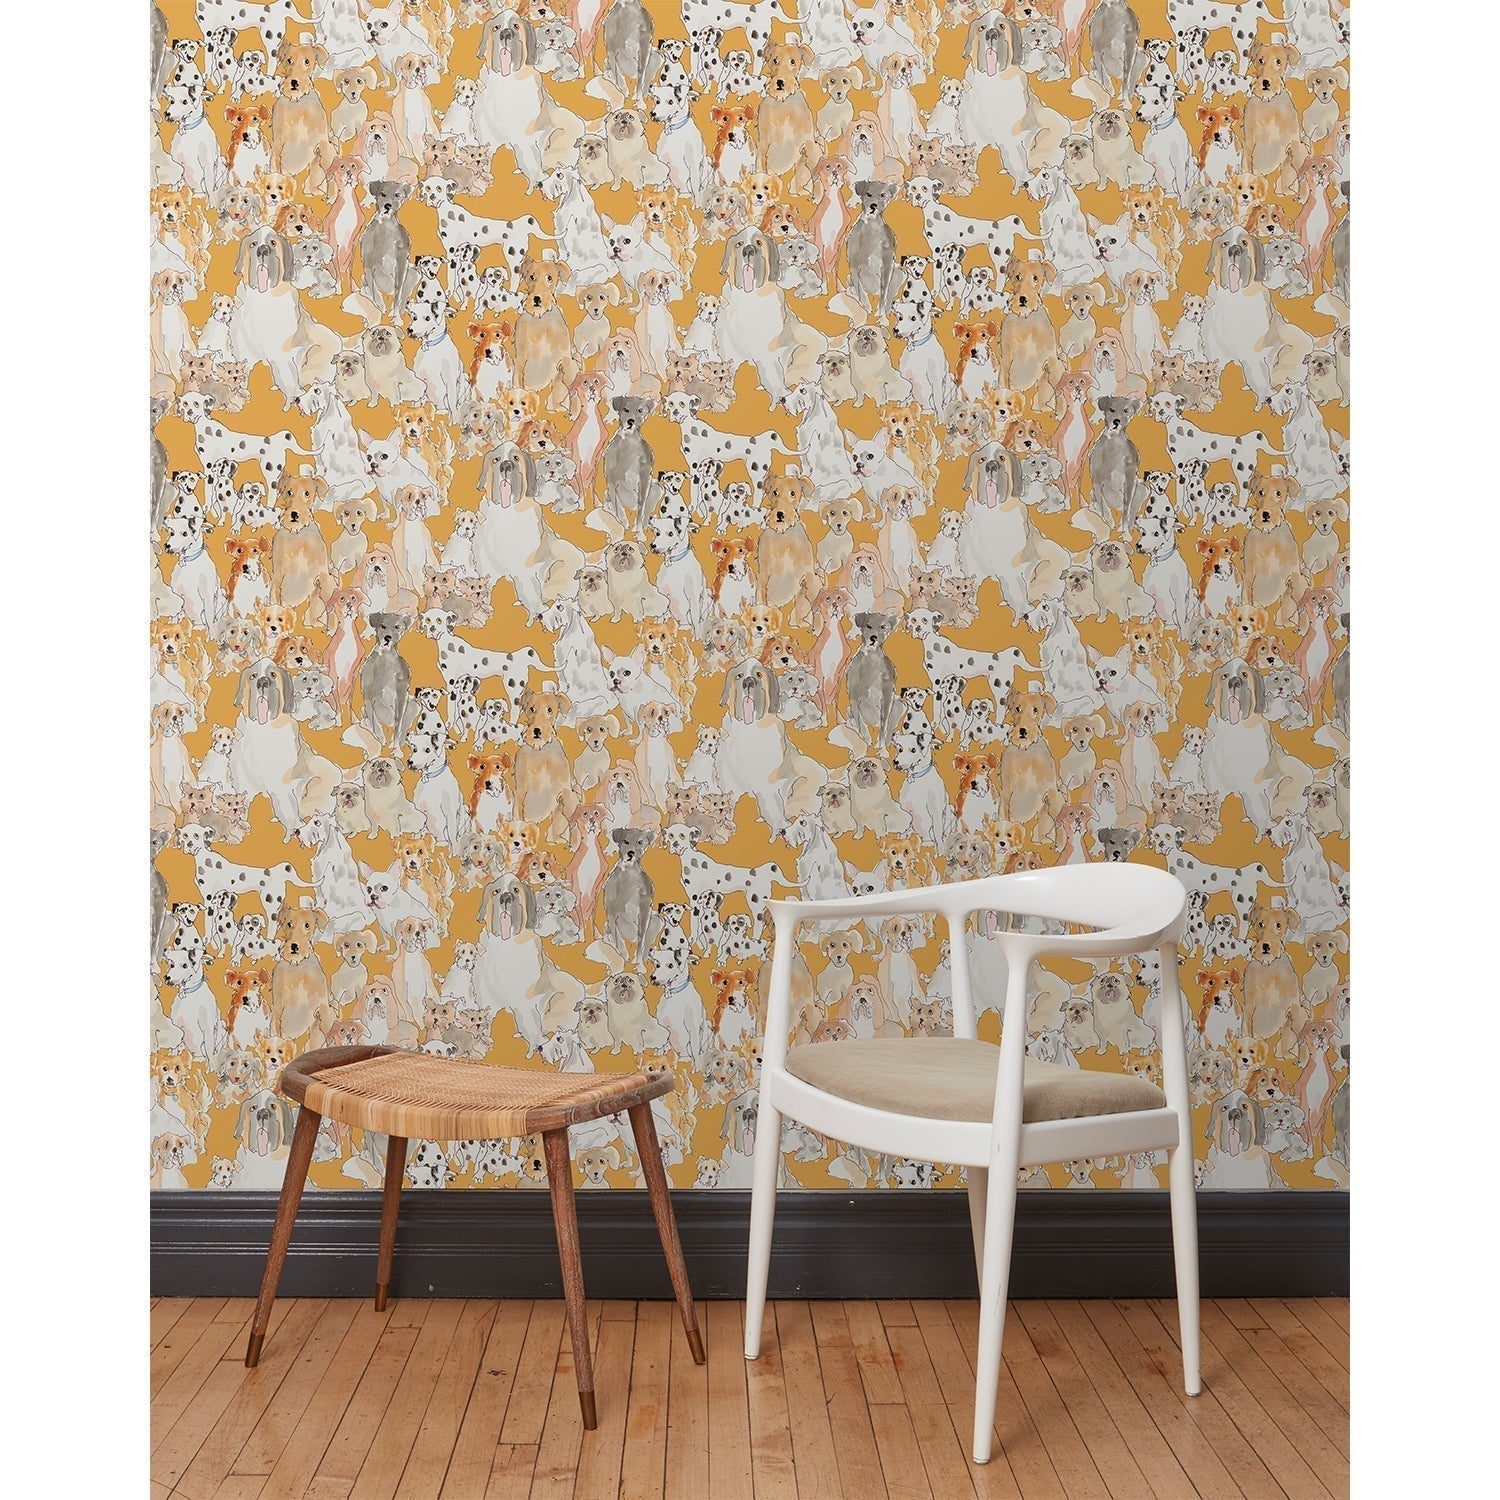 A chair and stool in front of a wall papered in a pattern of many different types of illustrated watercolor dogs with a mustard background.